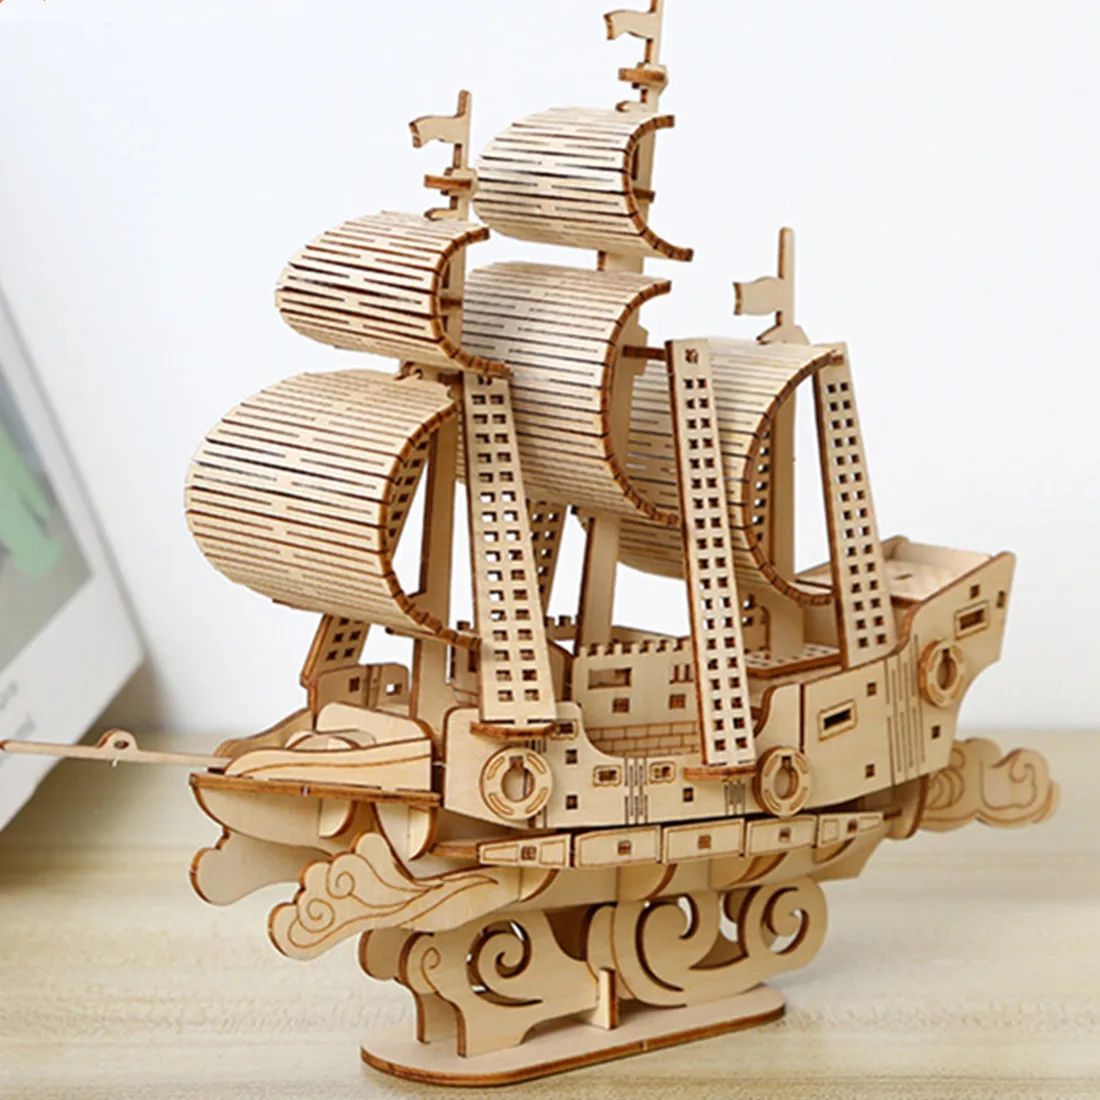 3D Puzzles Wooden Ocean Sailing Model Handmade Boat Building BlockS Kits DIY Assembly Ship Toy for Kids Adults GiftS bburago 2023 f1 ferrari sf23 racing 1 43 alloy diecast car model luxury display box collection cars gifts toys for adults